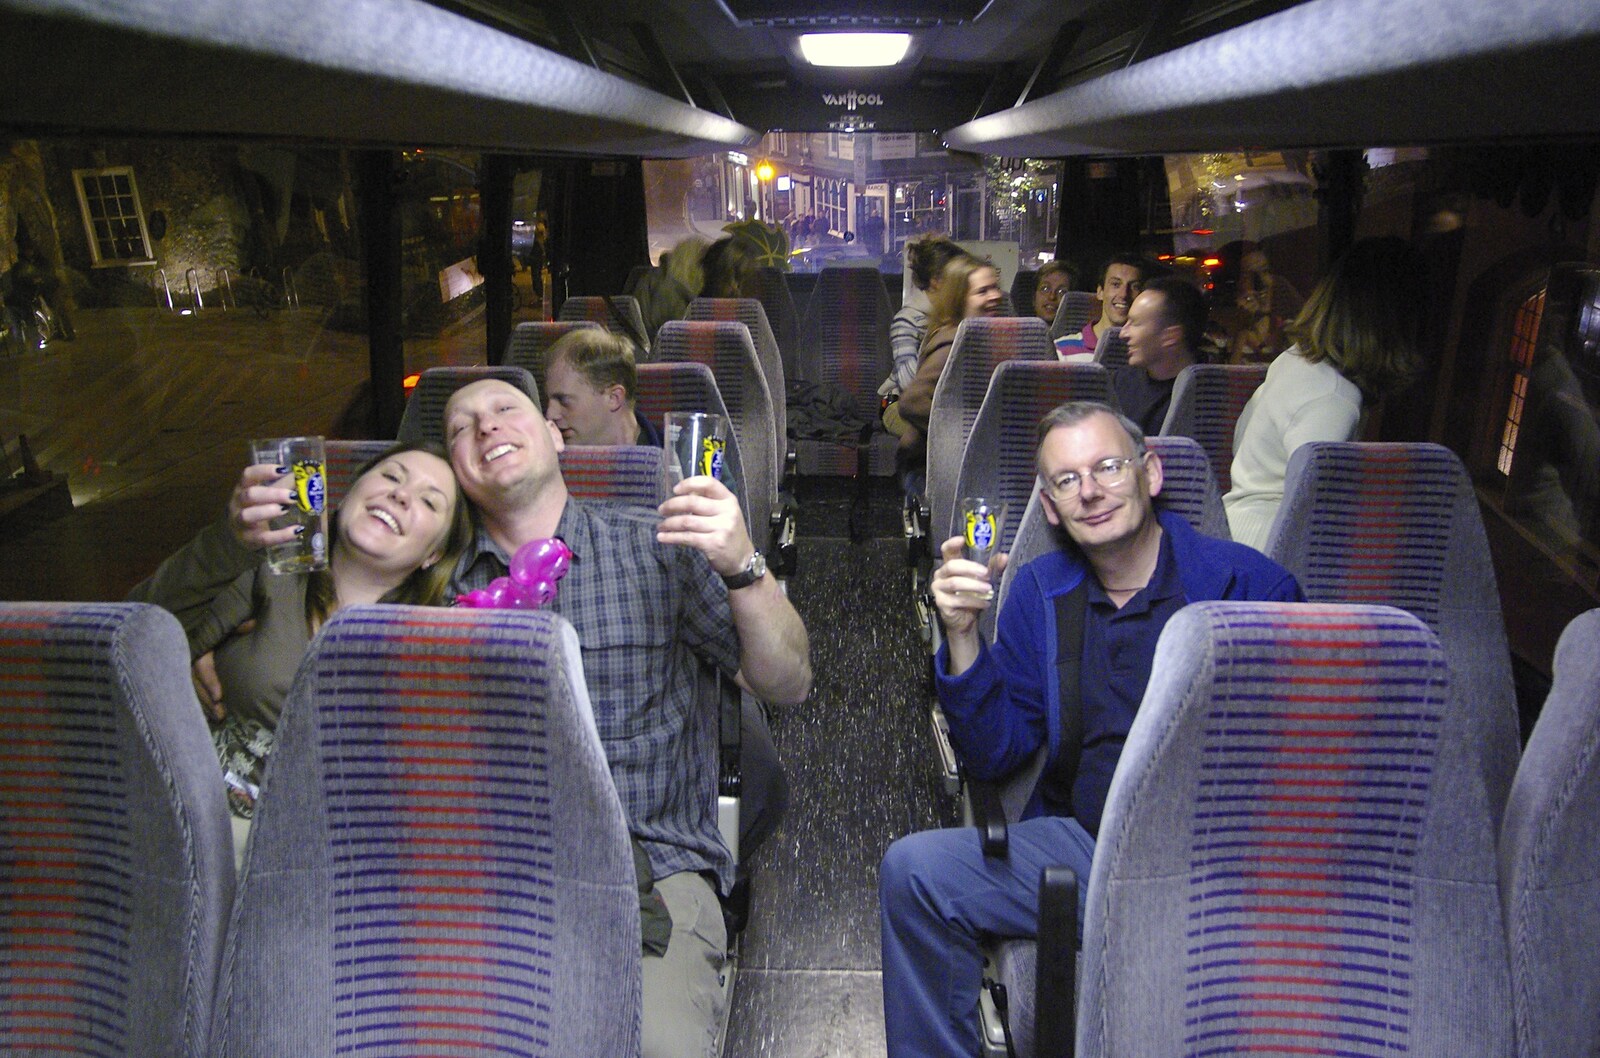 The 30th Norwich Beer Festival, St. Andrew's Hall, Norfolk - 24th October 2007: On the bus: Rachel, Gov and 'Ping-pong' Peter